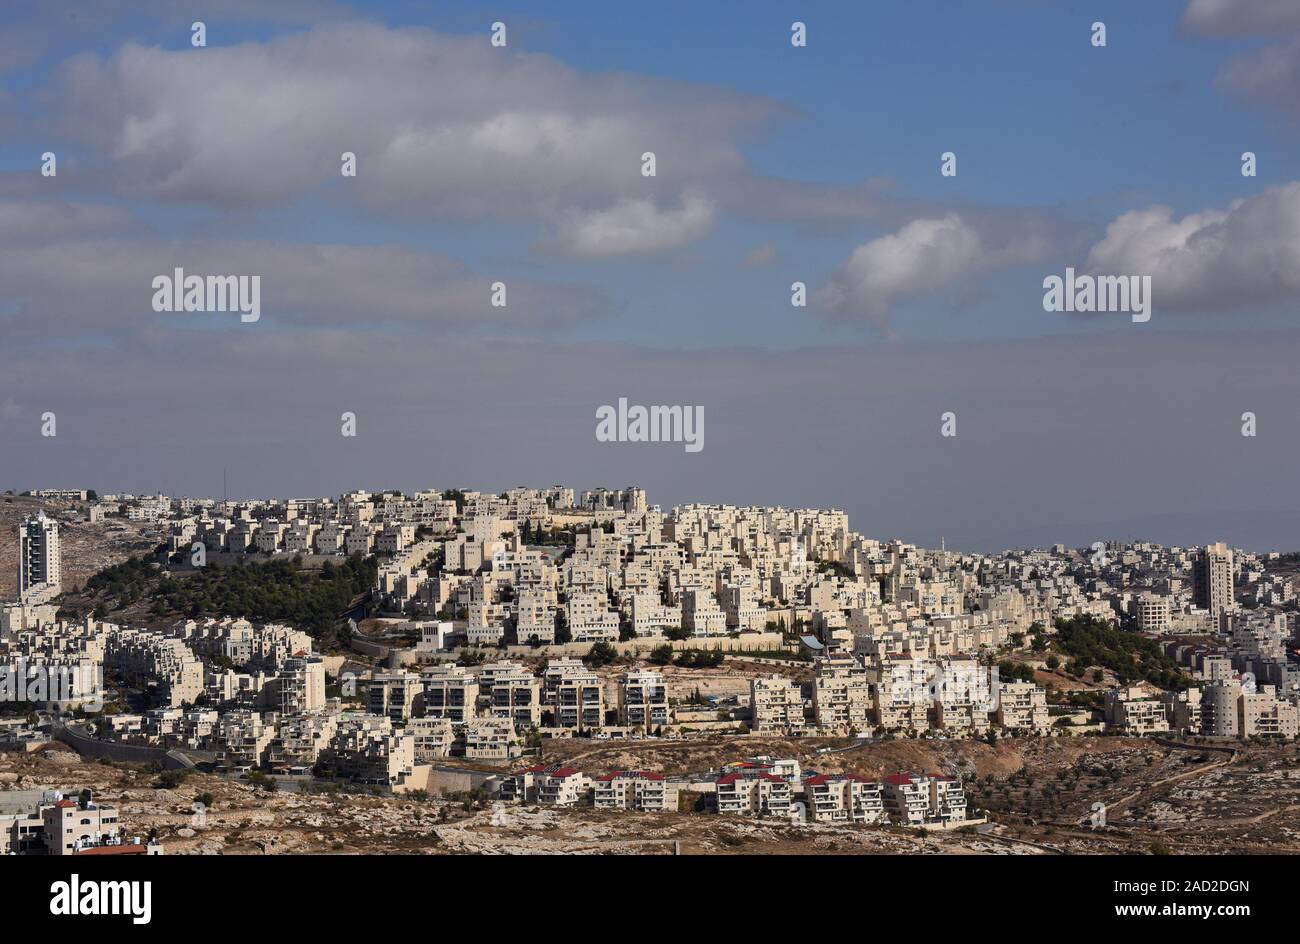 Bethlehem, West Bank. 03rd Dec, 2019. The Israeli settlement of Har Homa is seen on the hilltop overlooking the Palestinian town of Bethlehem, West Bank, December 3, 2019. Palestinian officials say the biblical city of Bethlehem is being suffocated by the expansion of Israeli settlements that is taking Palestinian lands to build Jewish homes in the West Bank. Photo by Debbie Hill/UPI Credit: UPI/Alamy Live News Stock Photo